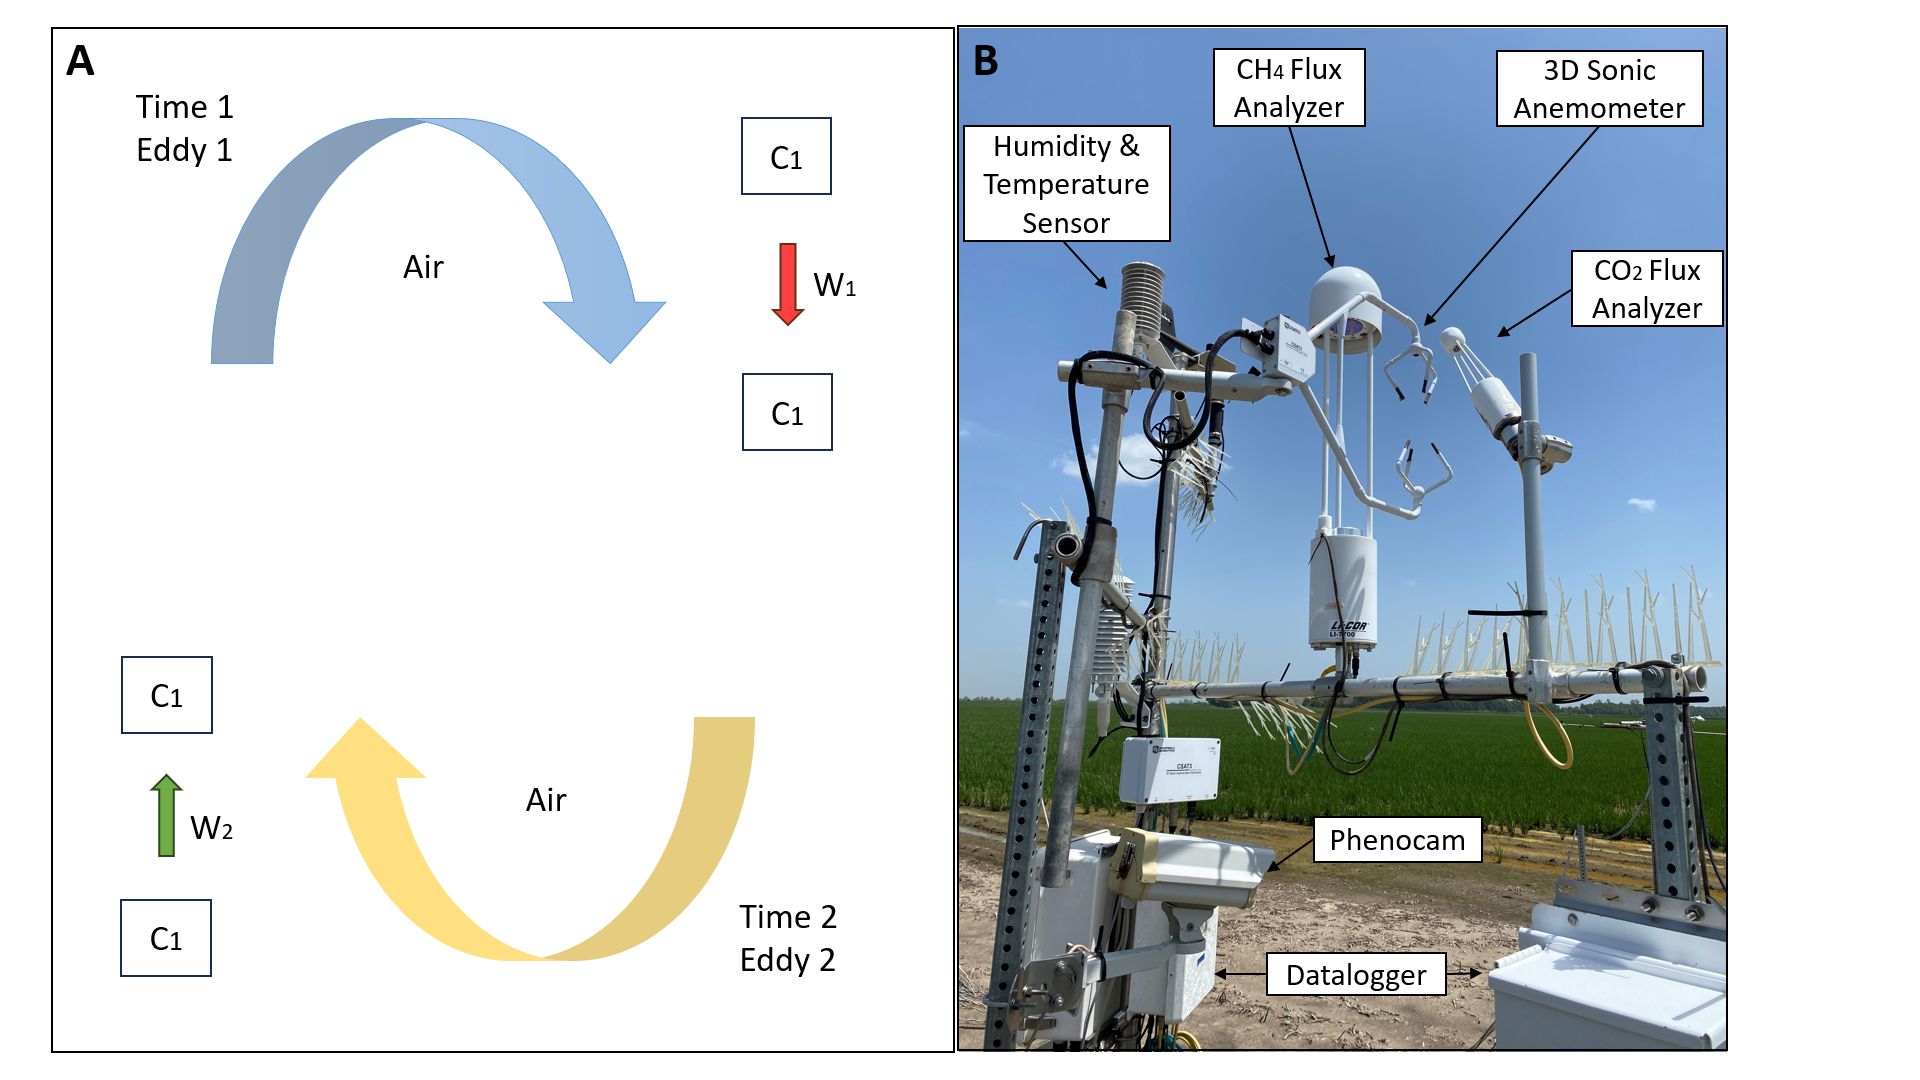 (A) Two eddies on the tower showing CO2 with parcel of air C1 moving down at speed W1 and parcel of air C2 moving down at speed W2 (B) Eddy Covariance Flux Tower